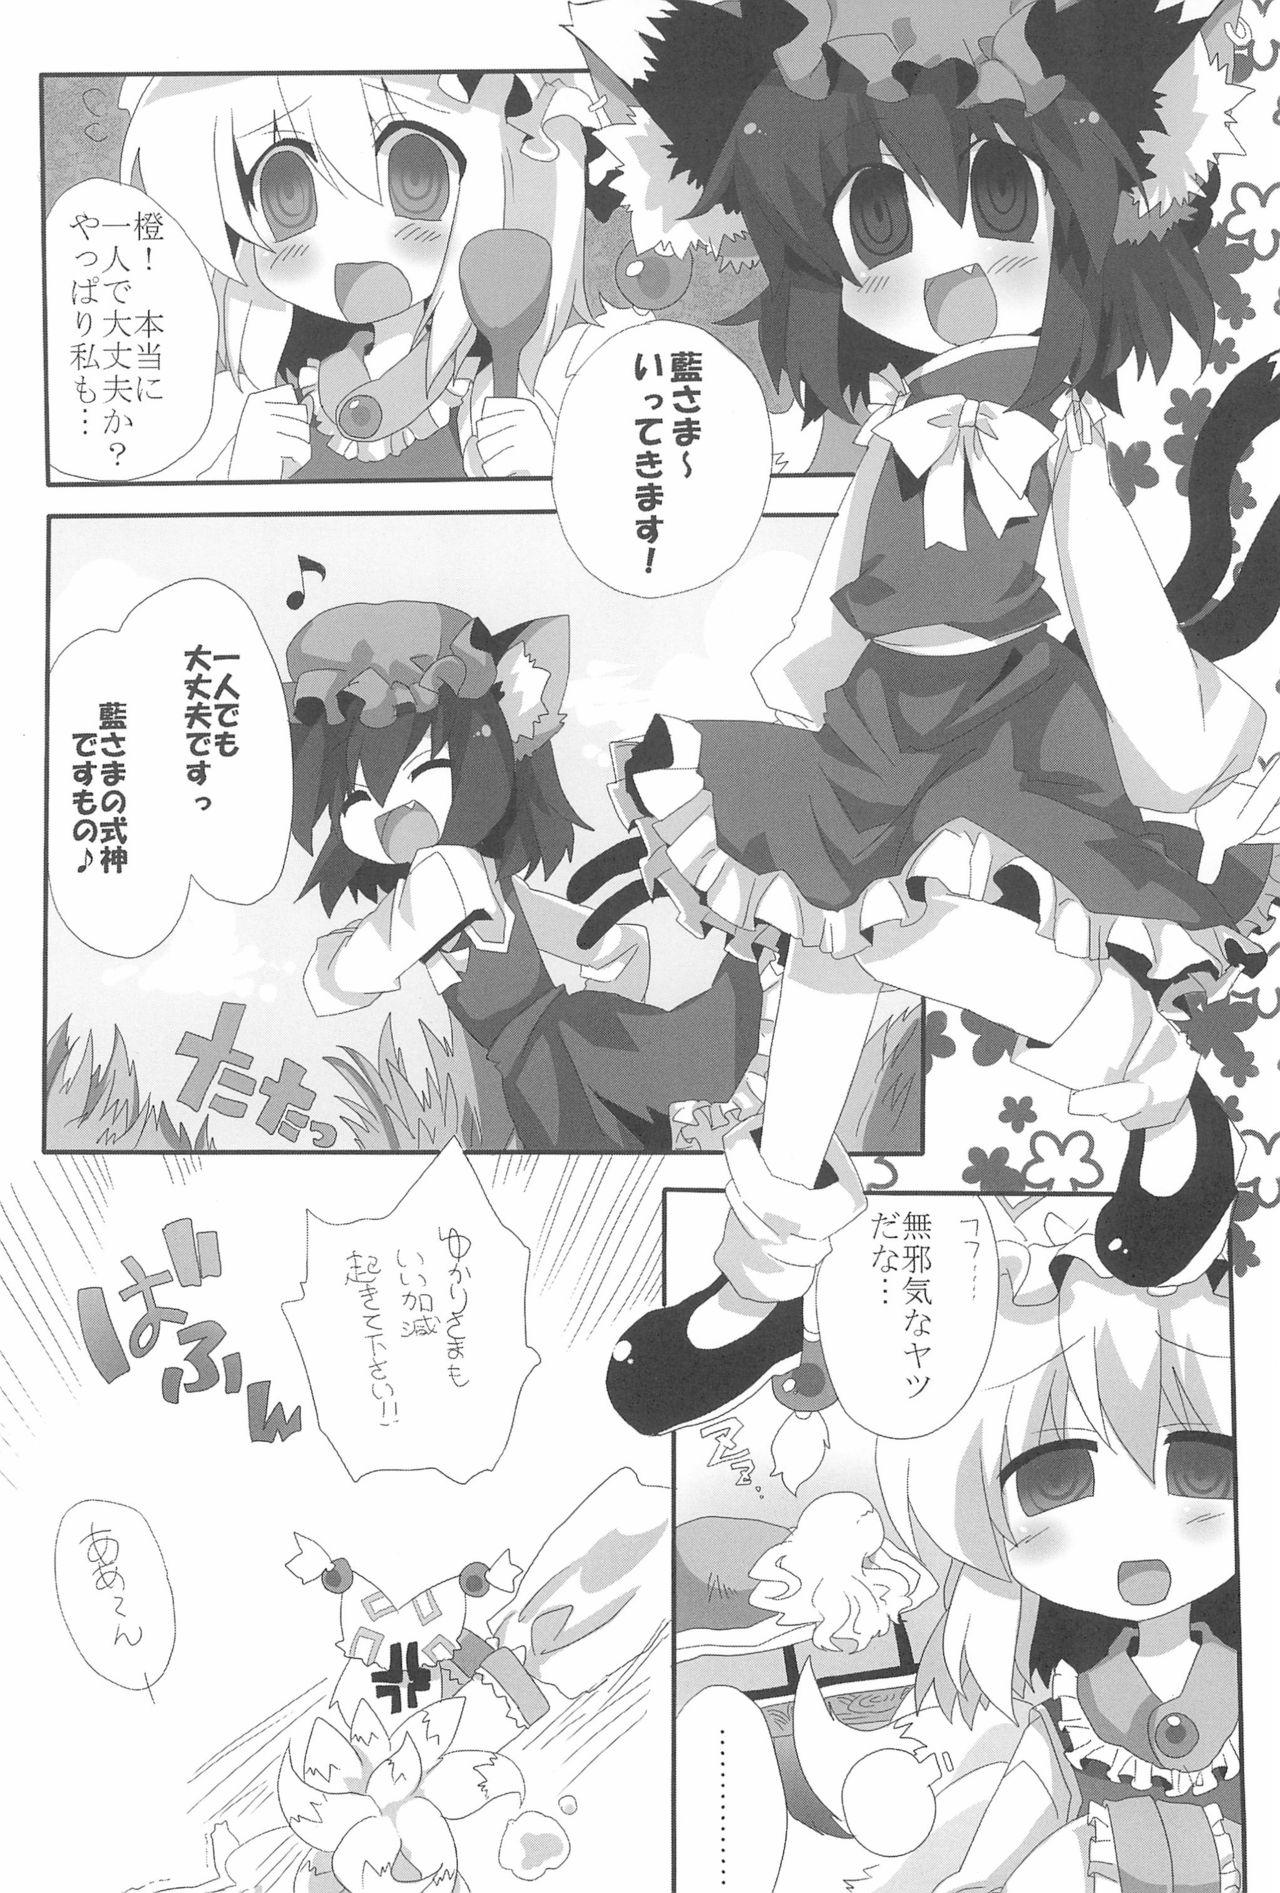 Assfingering NYAS! ATTRACTION - Touhou project Chaturbate - Page 4